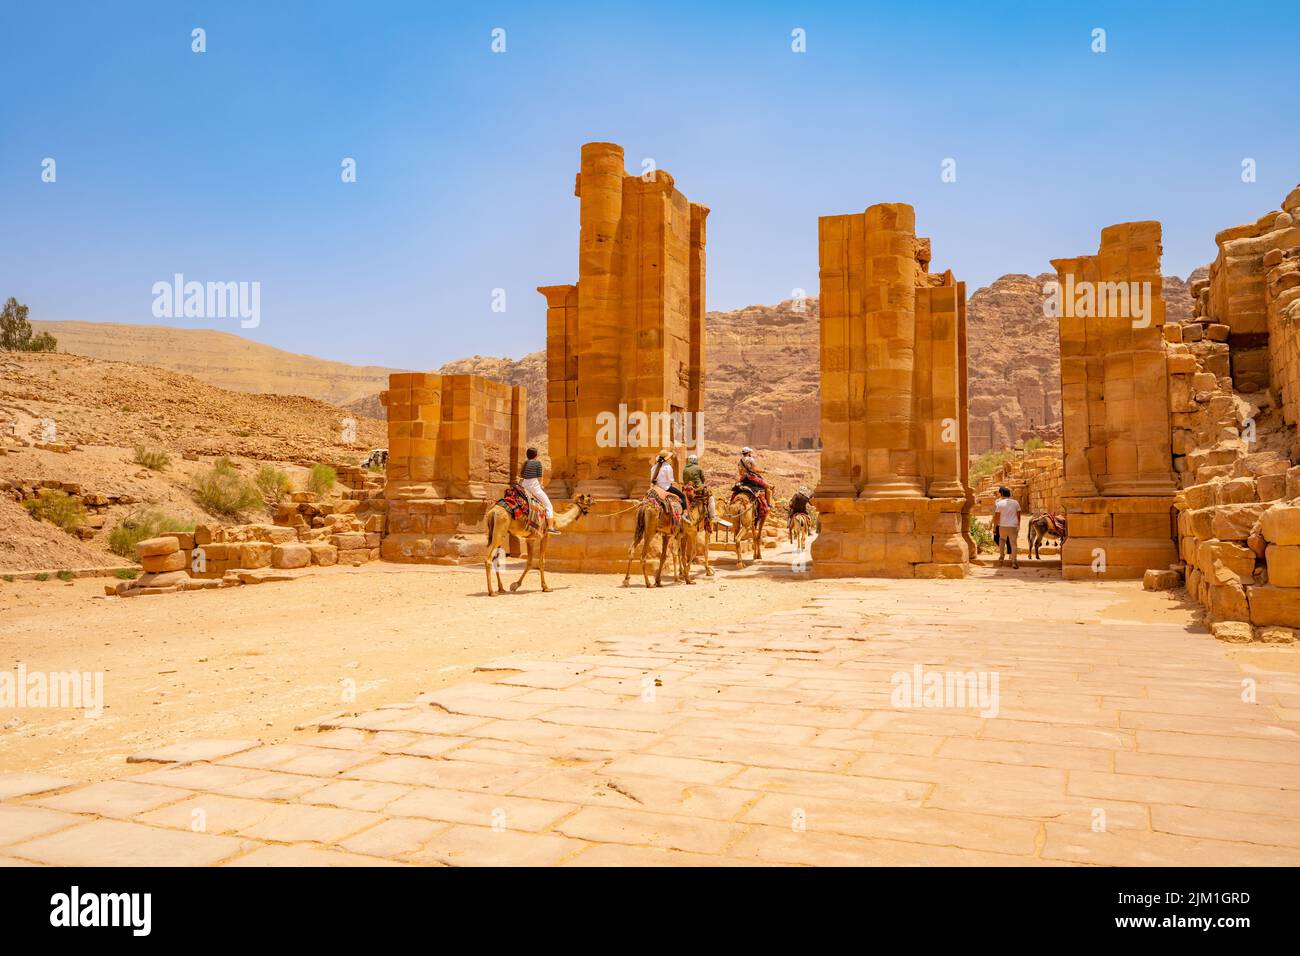 Camels passing through the Temenos Gate on Colonnaded Street Petra Jordan. Stock Photo